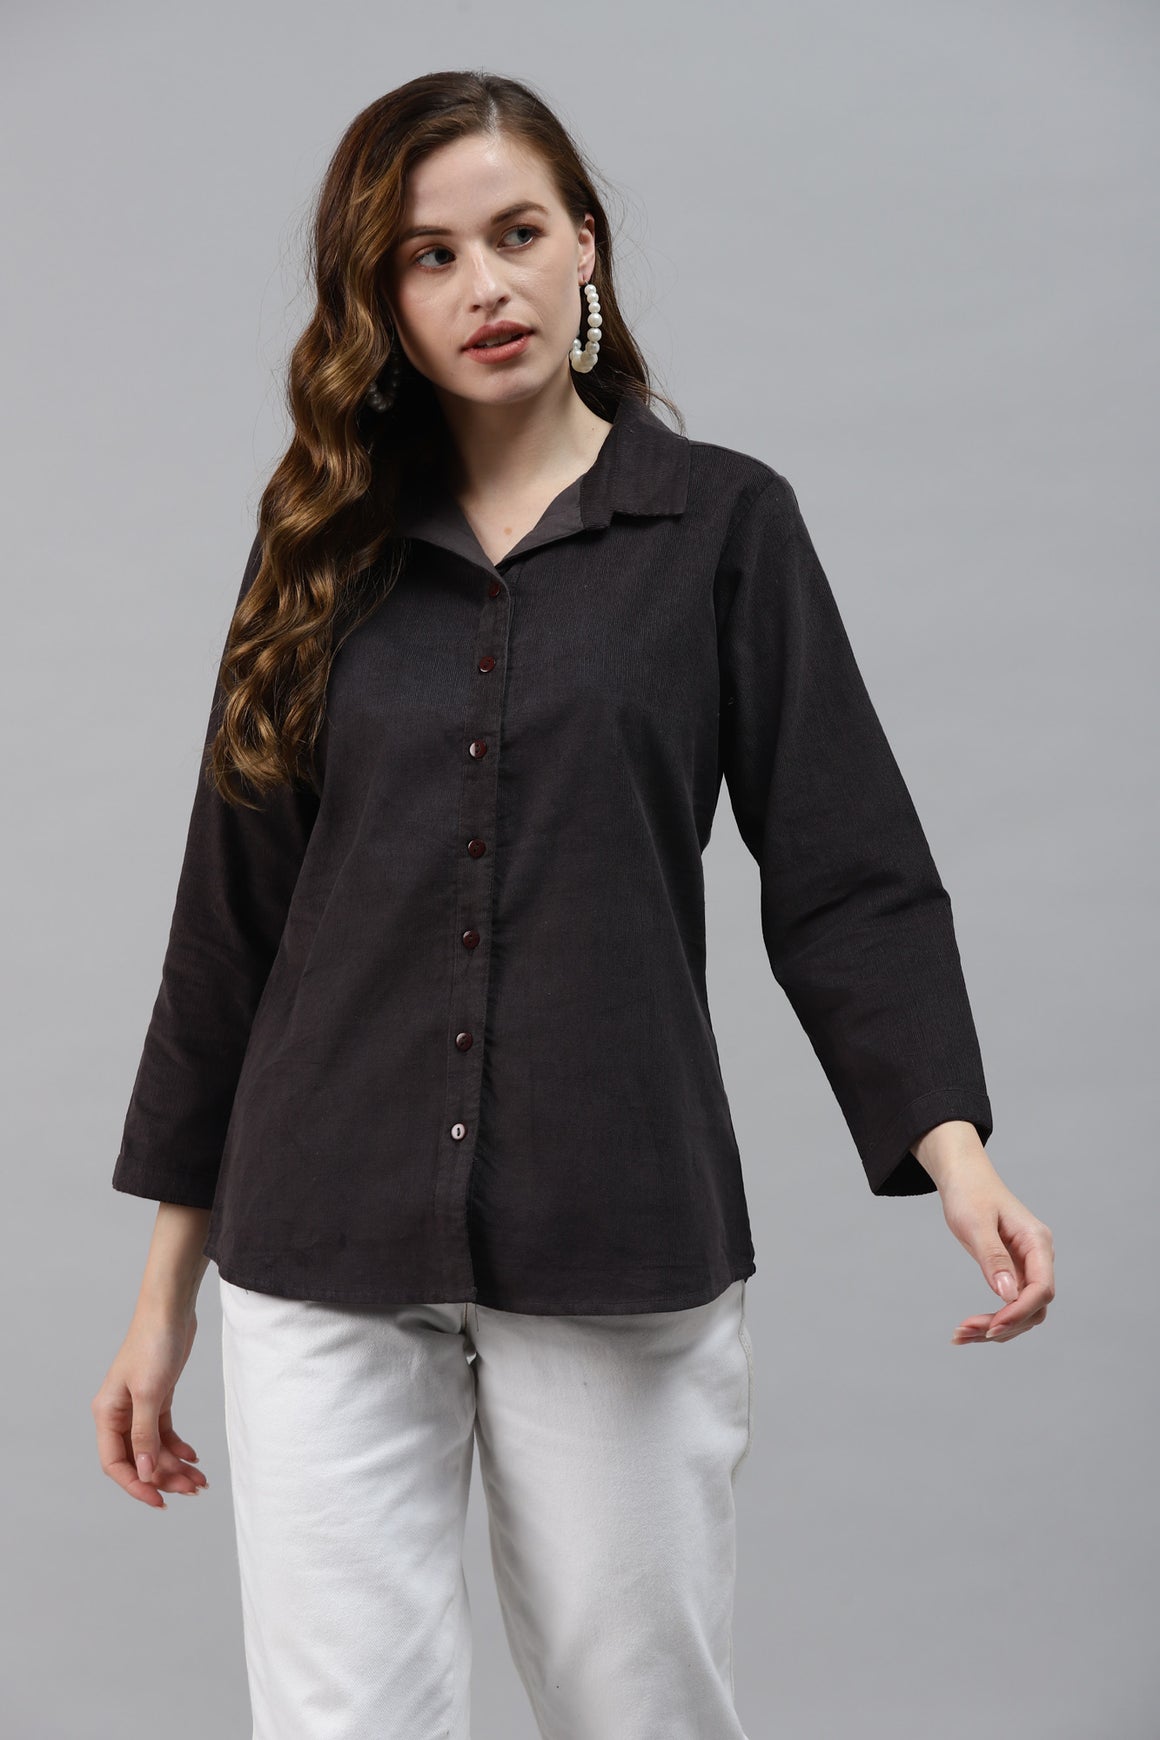 Collared Corduory Shirt Style Black Top